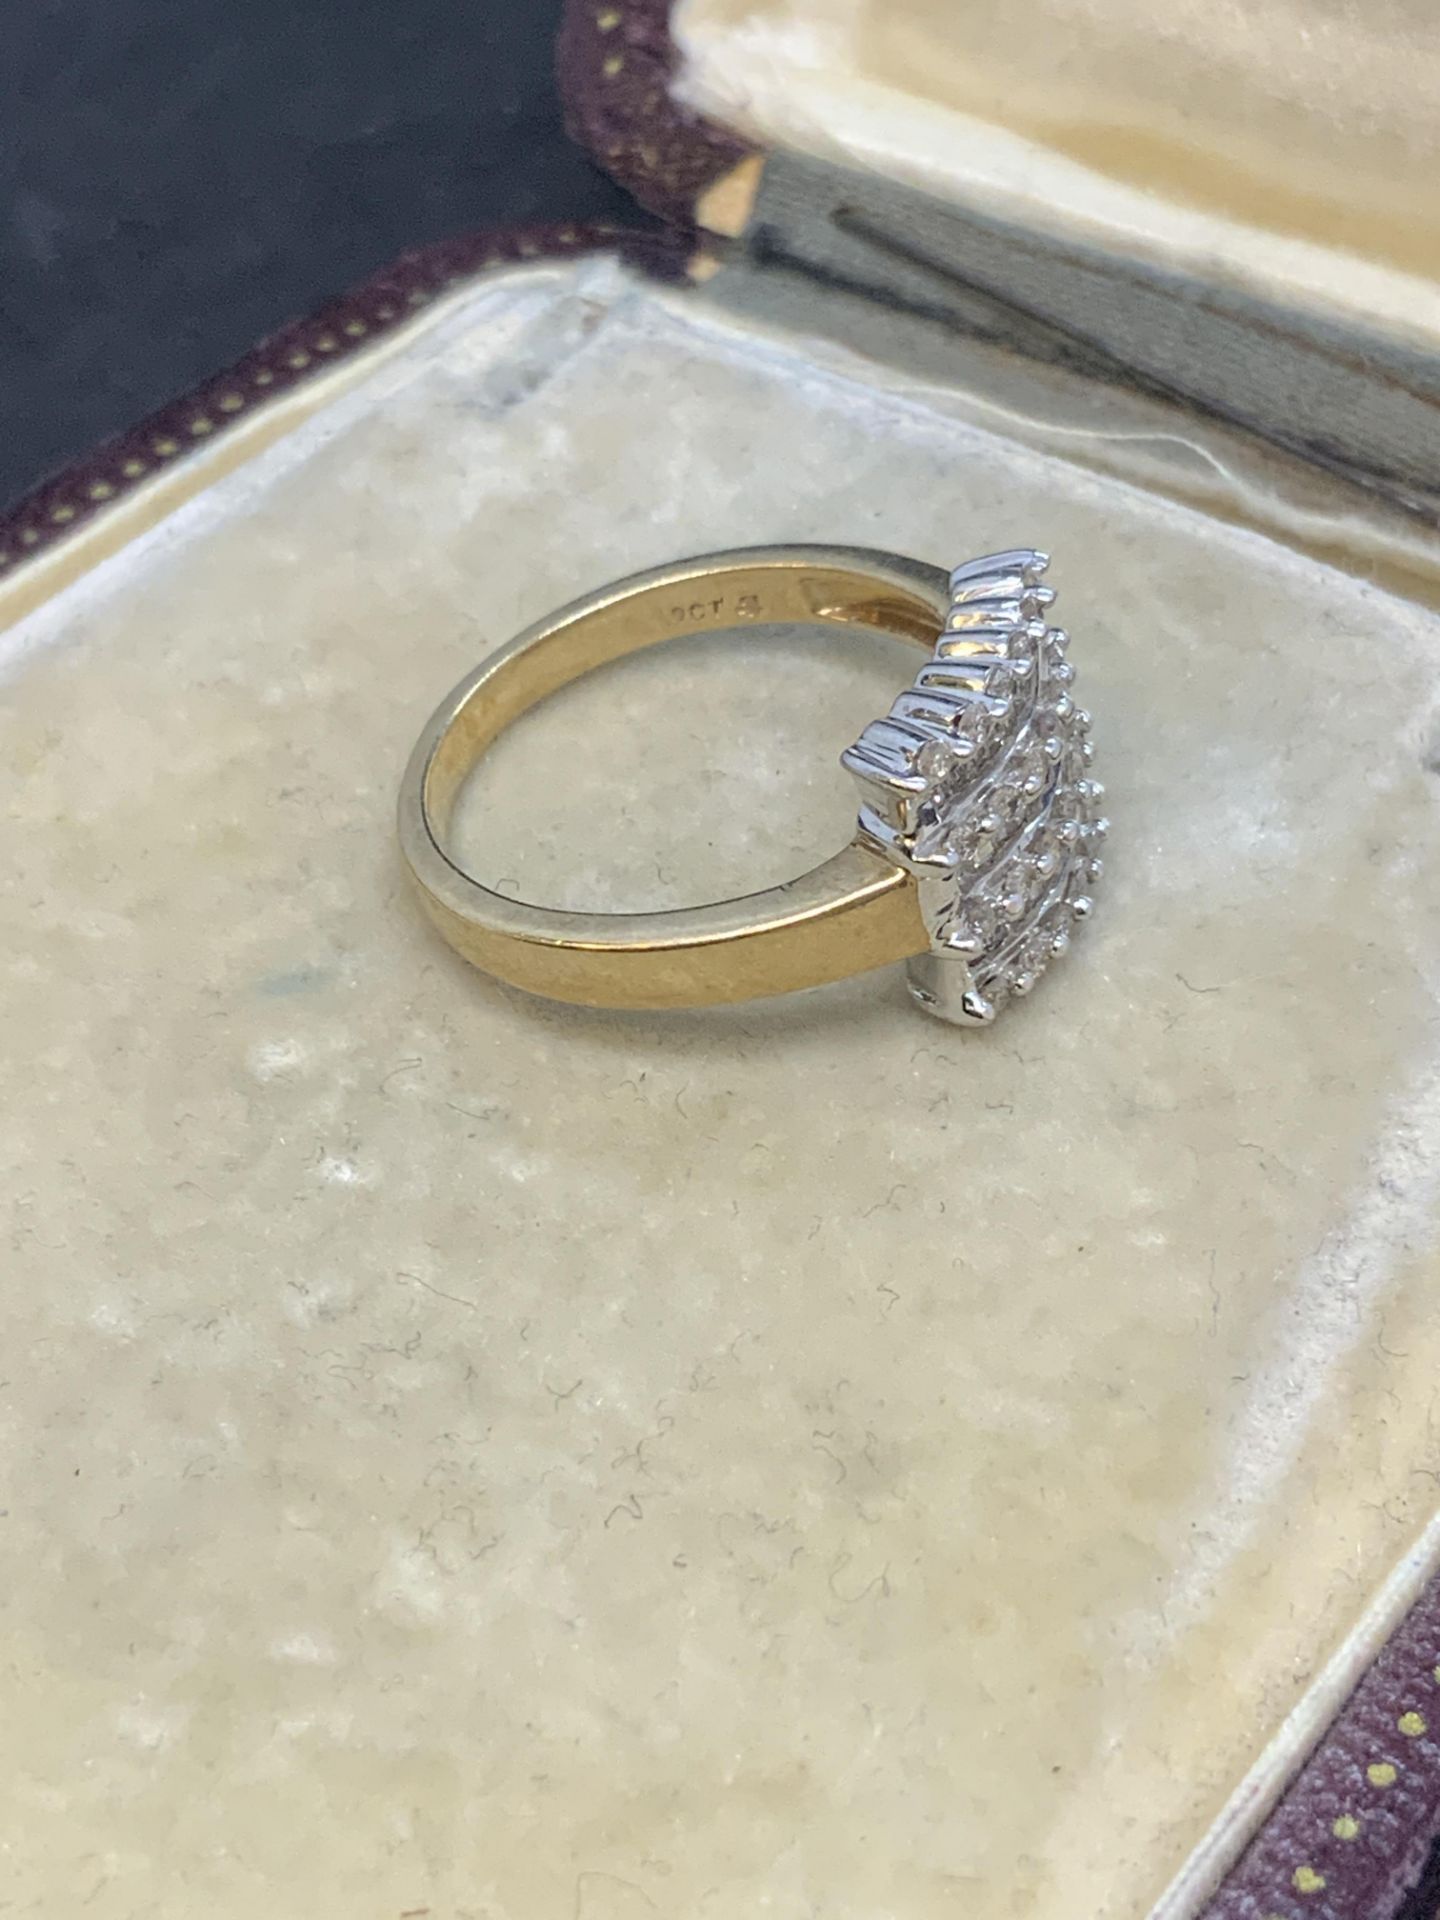 9ct GOLD 0.80ct APPROX DIAMOND SET RING - Image 3 of 6